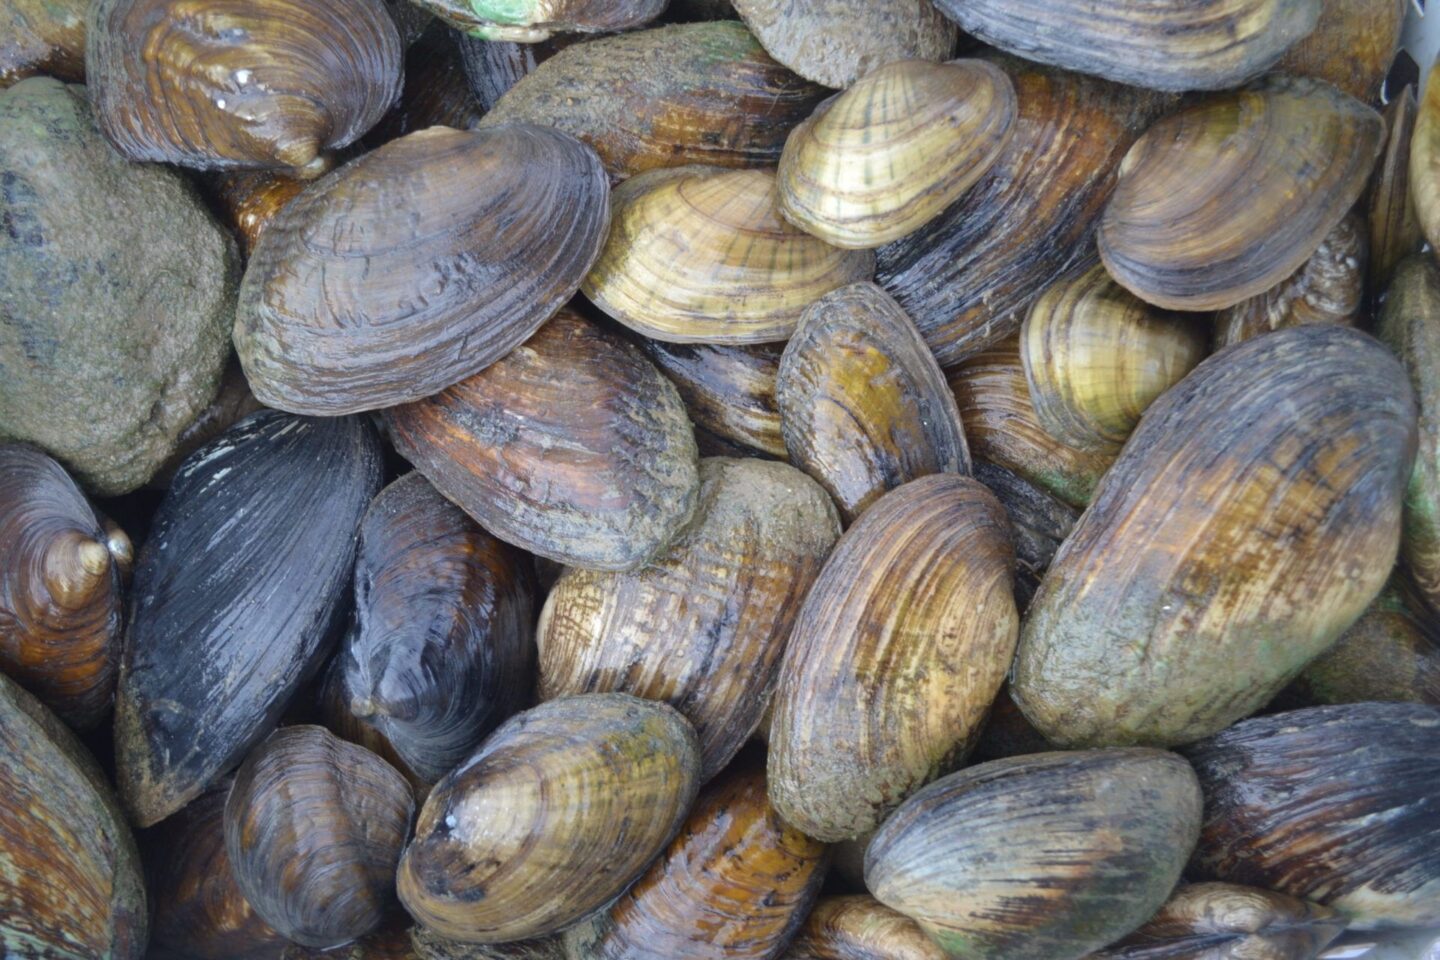 Schools selected for nation’s first Mussels in the Classroom program